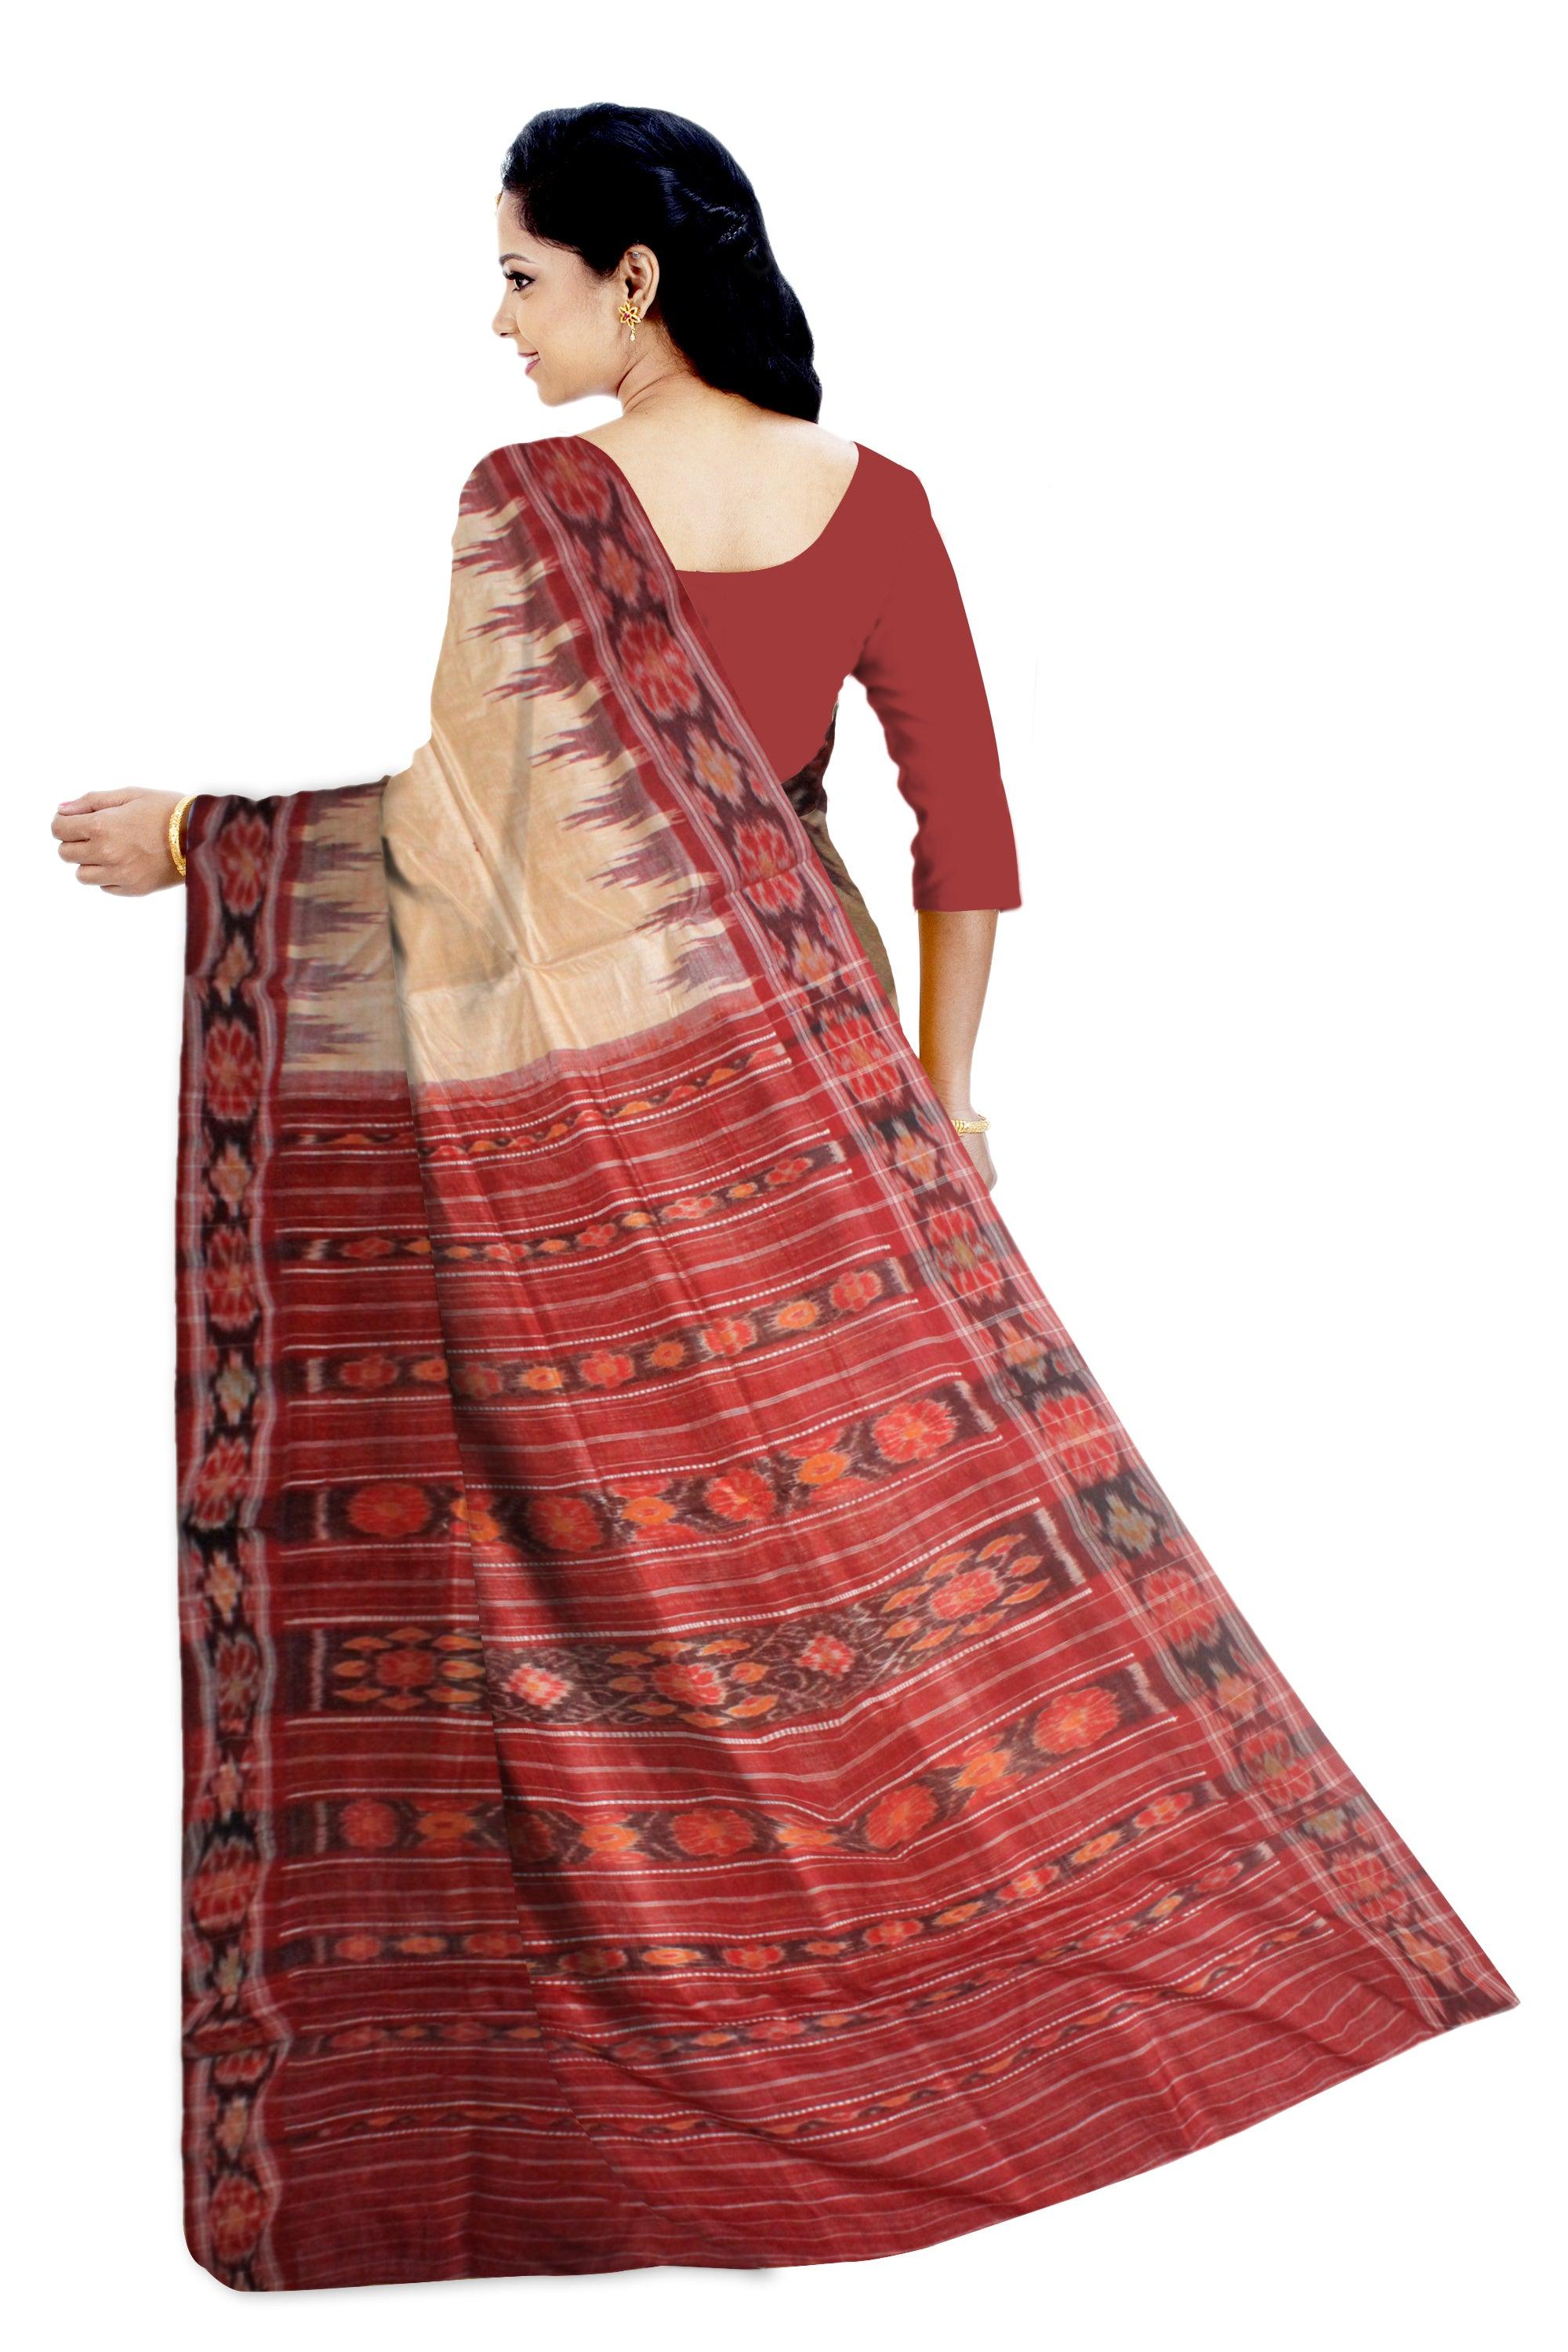 LATEST NEW COLLECTION SILK TUSSAR SAREE IN MATHHA AND MAROON COLOUR WITH OUT BLOUSE PIECE. - Koshali Arts & Crafts Enterprise